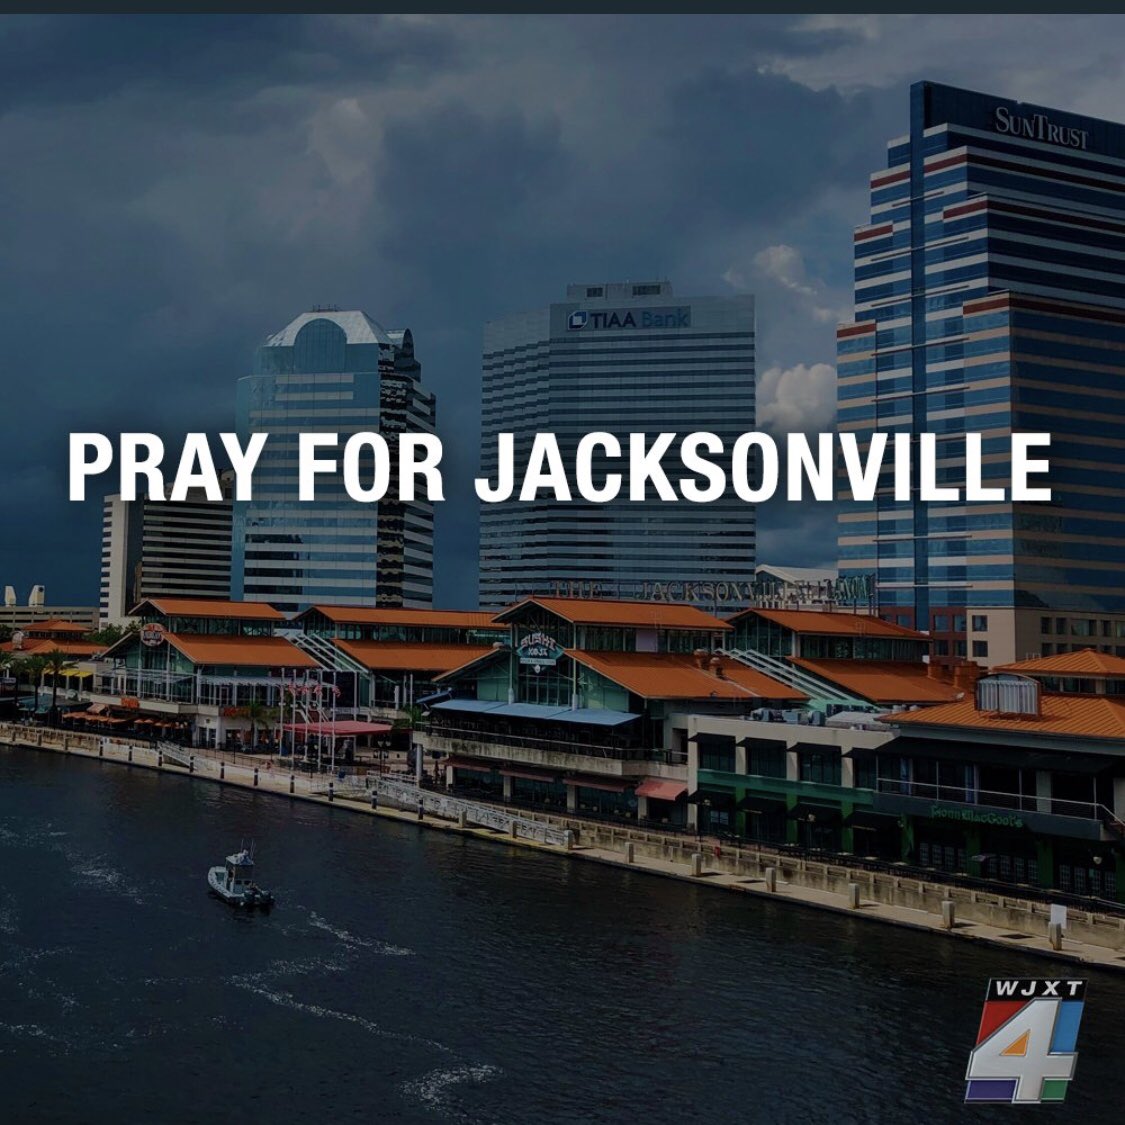 you never think it’s going to be your city with the next mass shooting but here we are 4 are dead because someone was so mad that lost in a video game a video game that they had to take 3 innocent lives, this breaks my heart #prayforjax please because this isn’t the duval we love